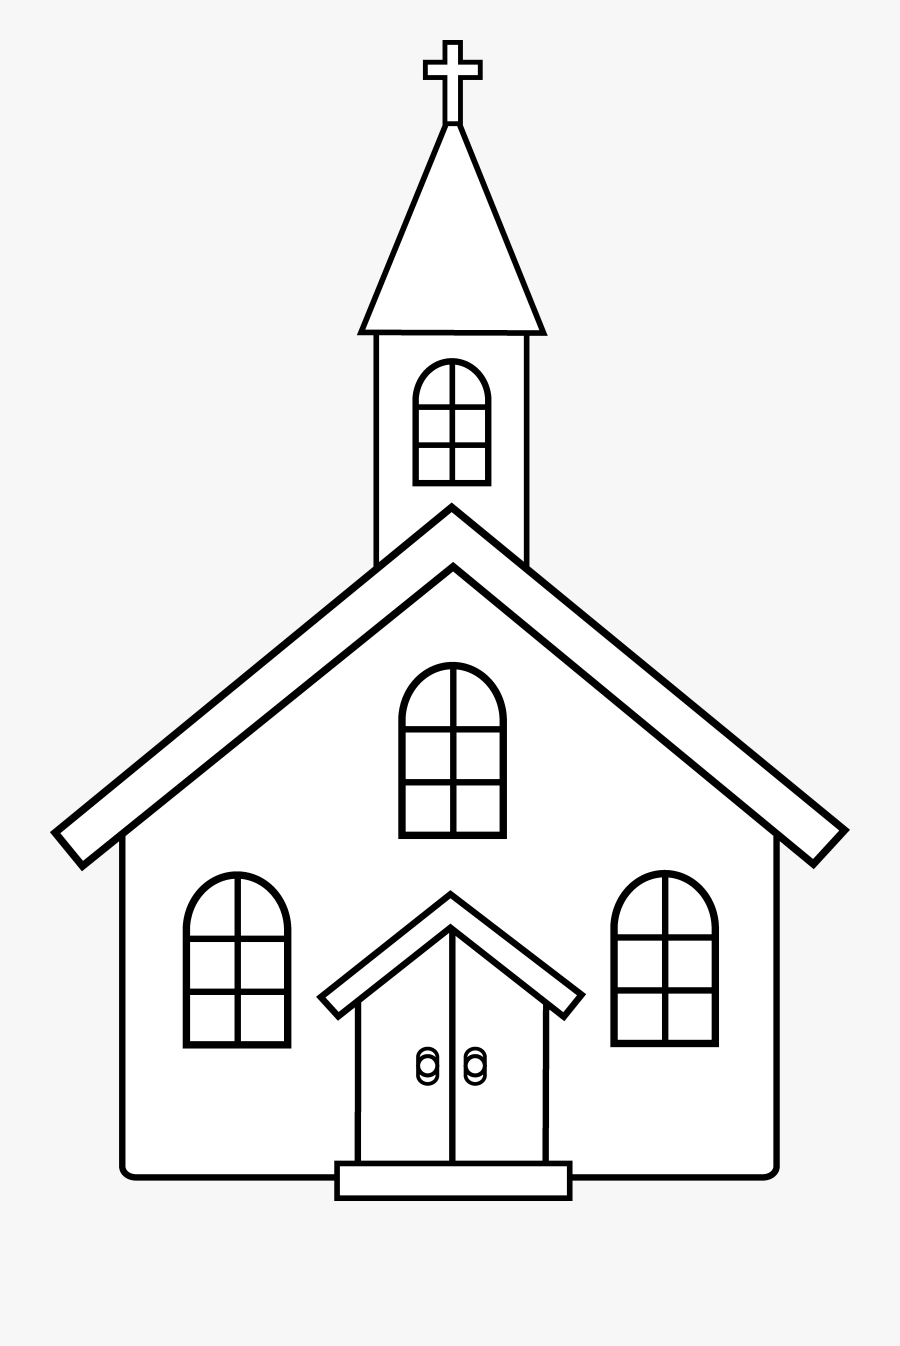 Thumb Image - Church Building Clipart Black And White, Transparent Clipart